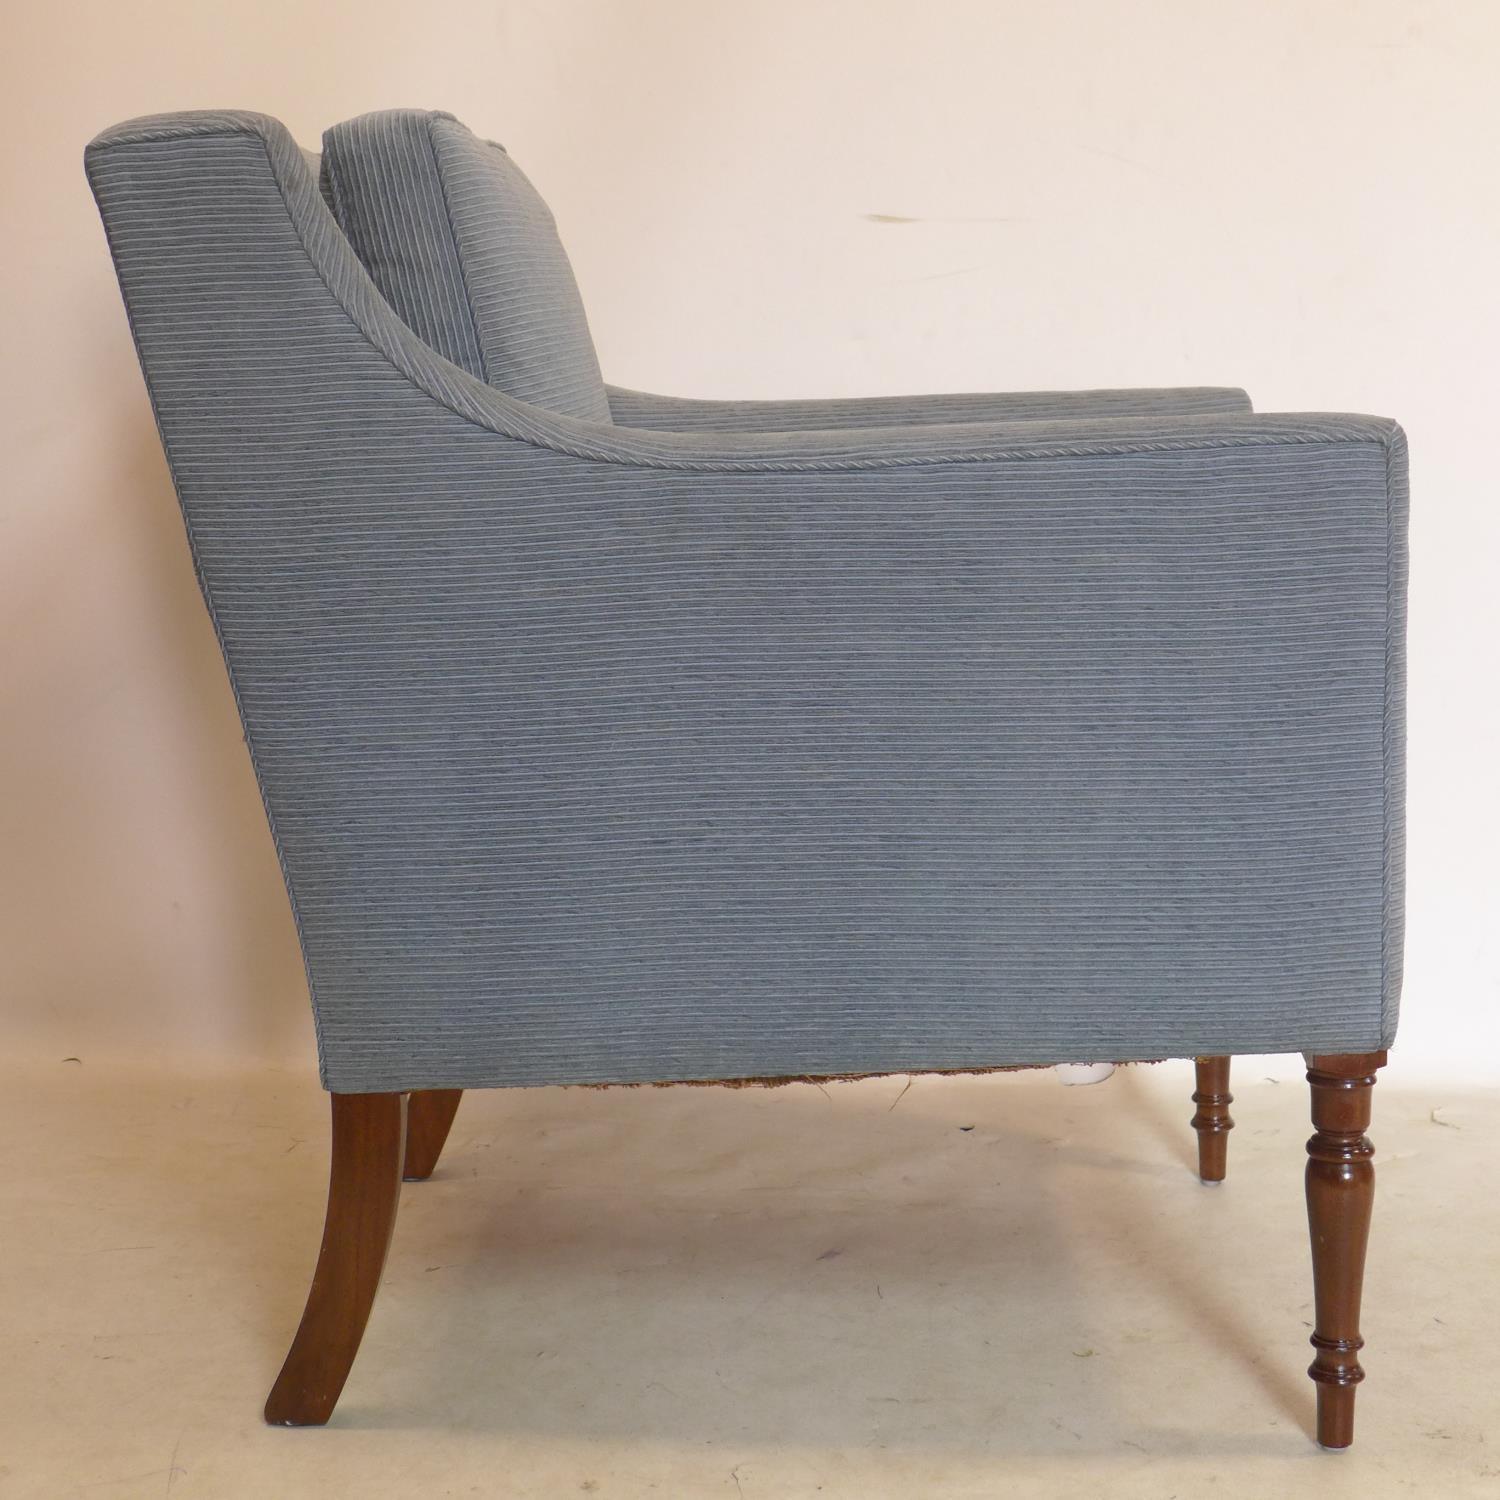 A Regency style armchair with blue corduroy upholstery, raised on turned legs - Image 2 of 3